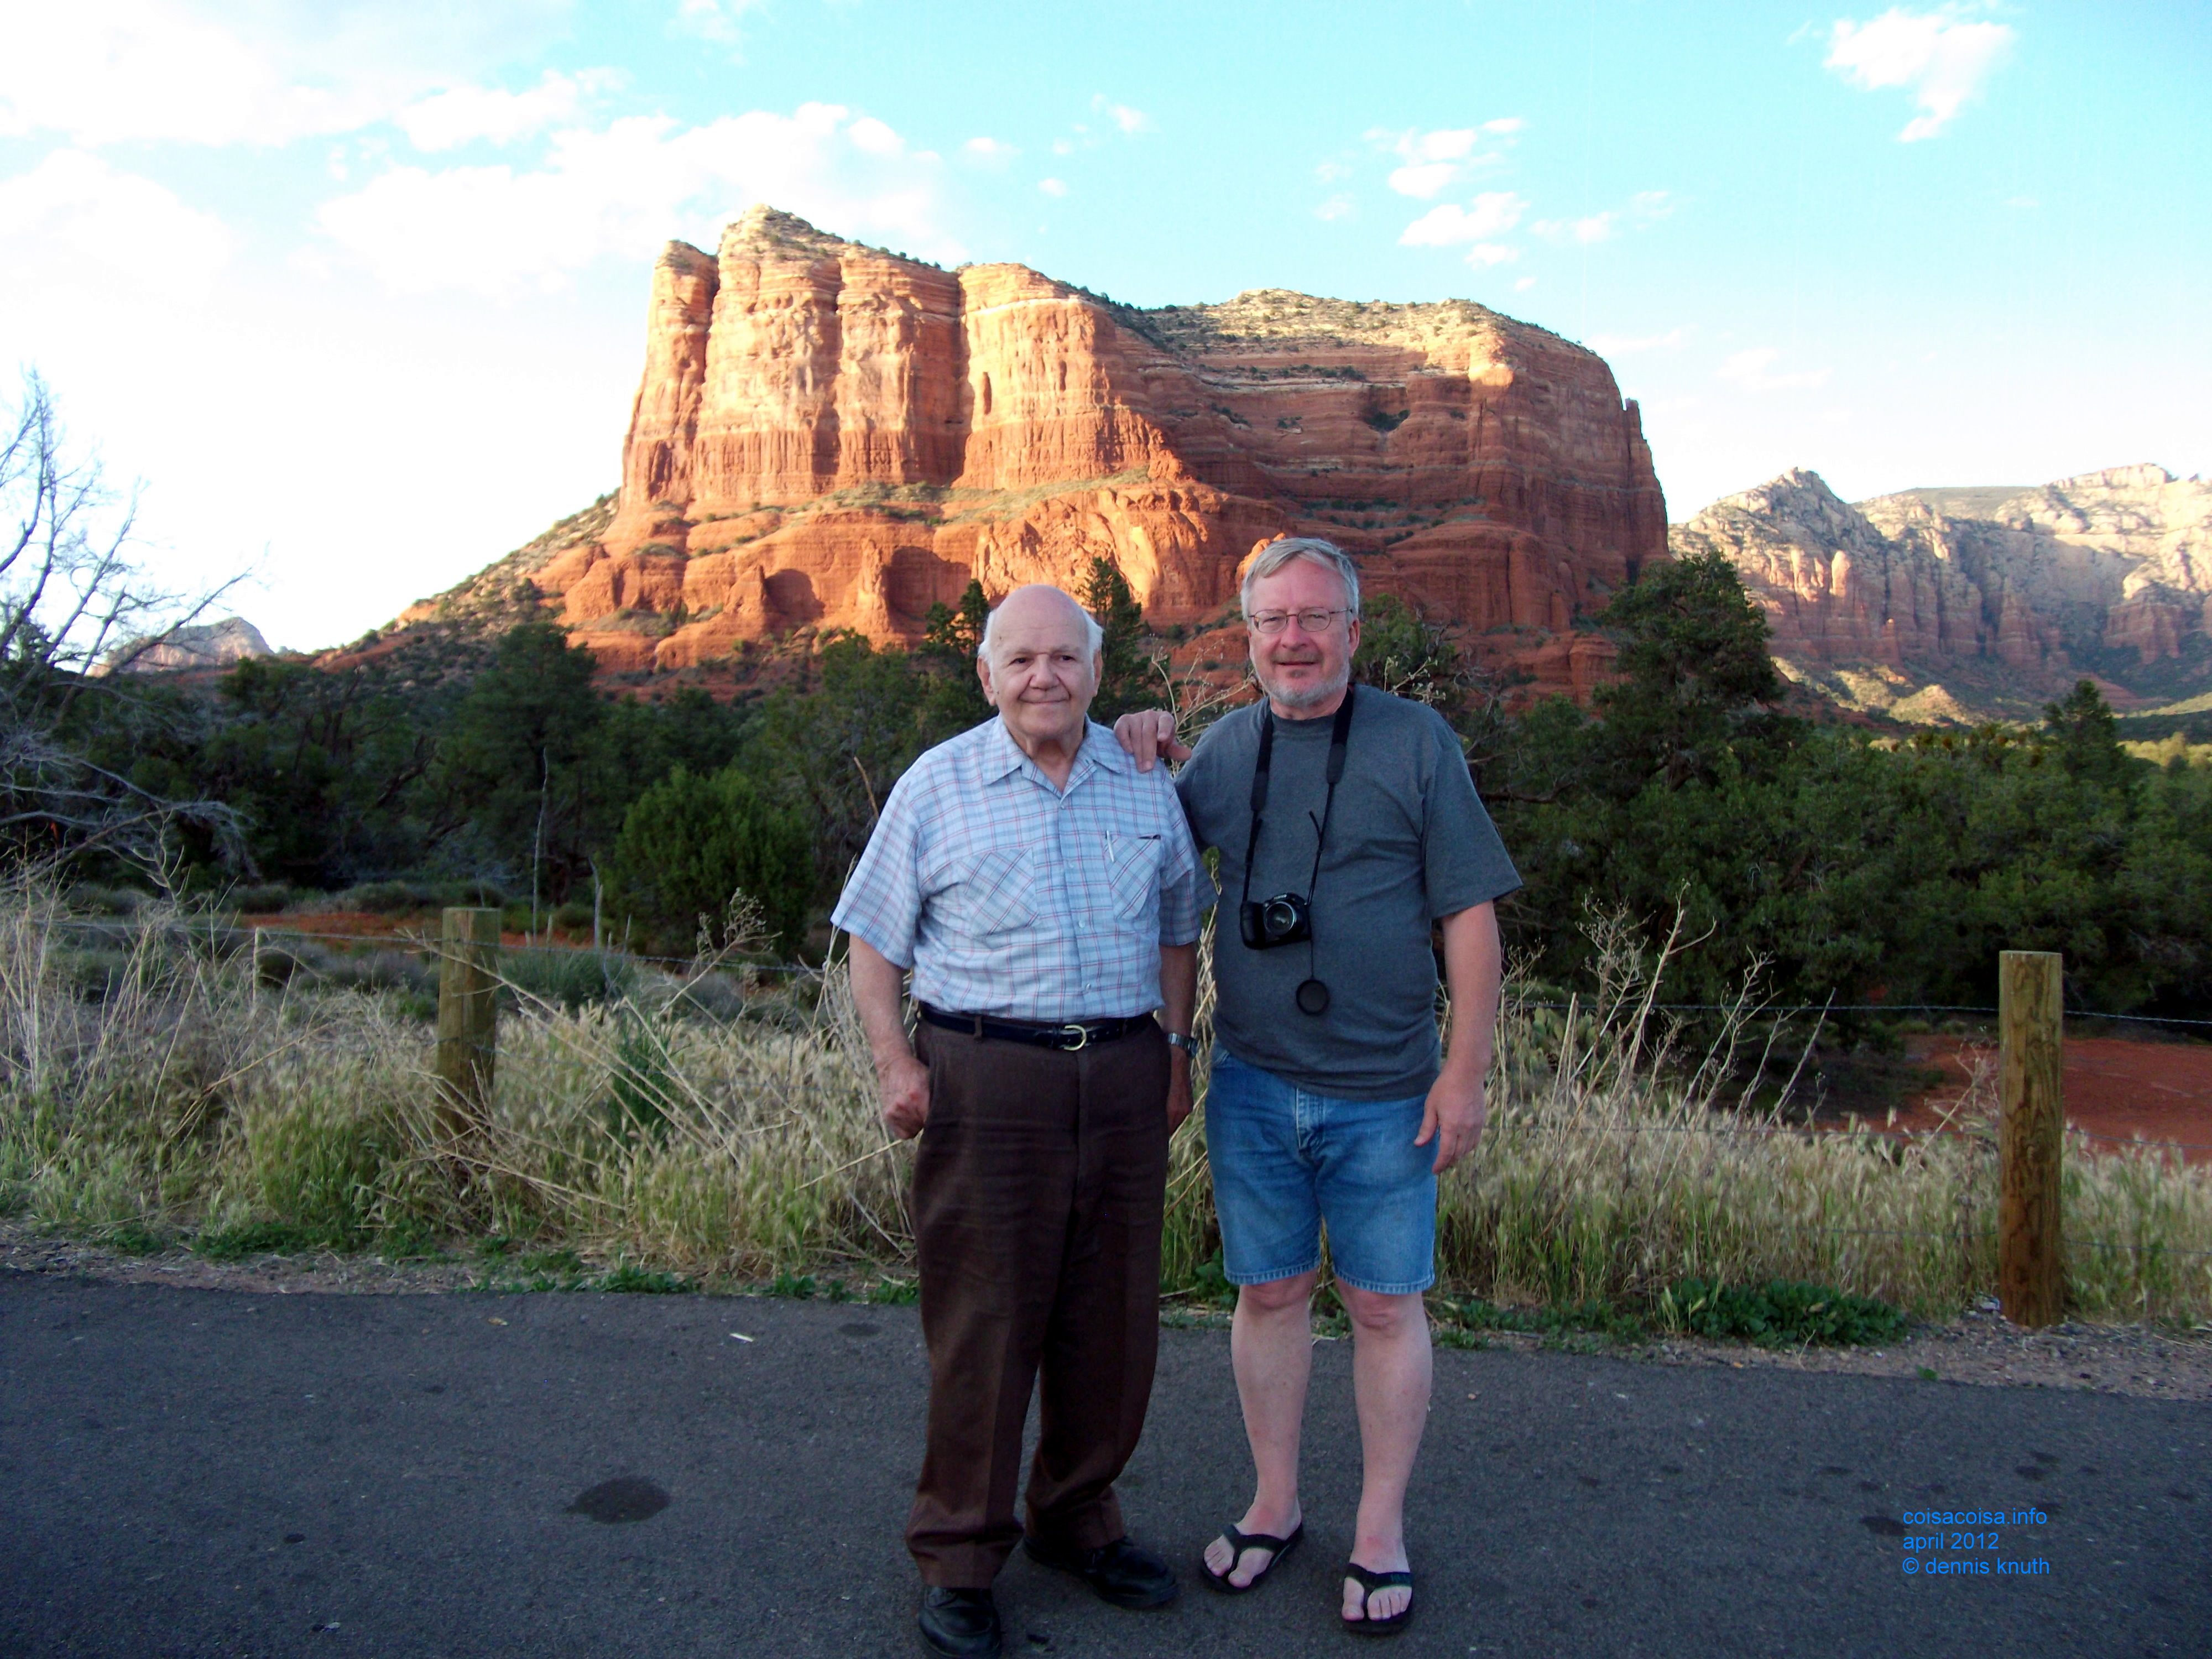 Orestus and Dennis Knuth at Red Rock Arizona